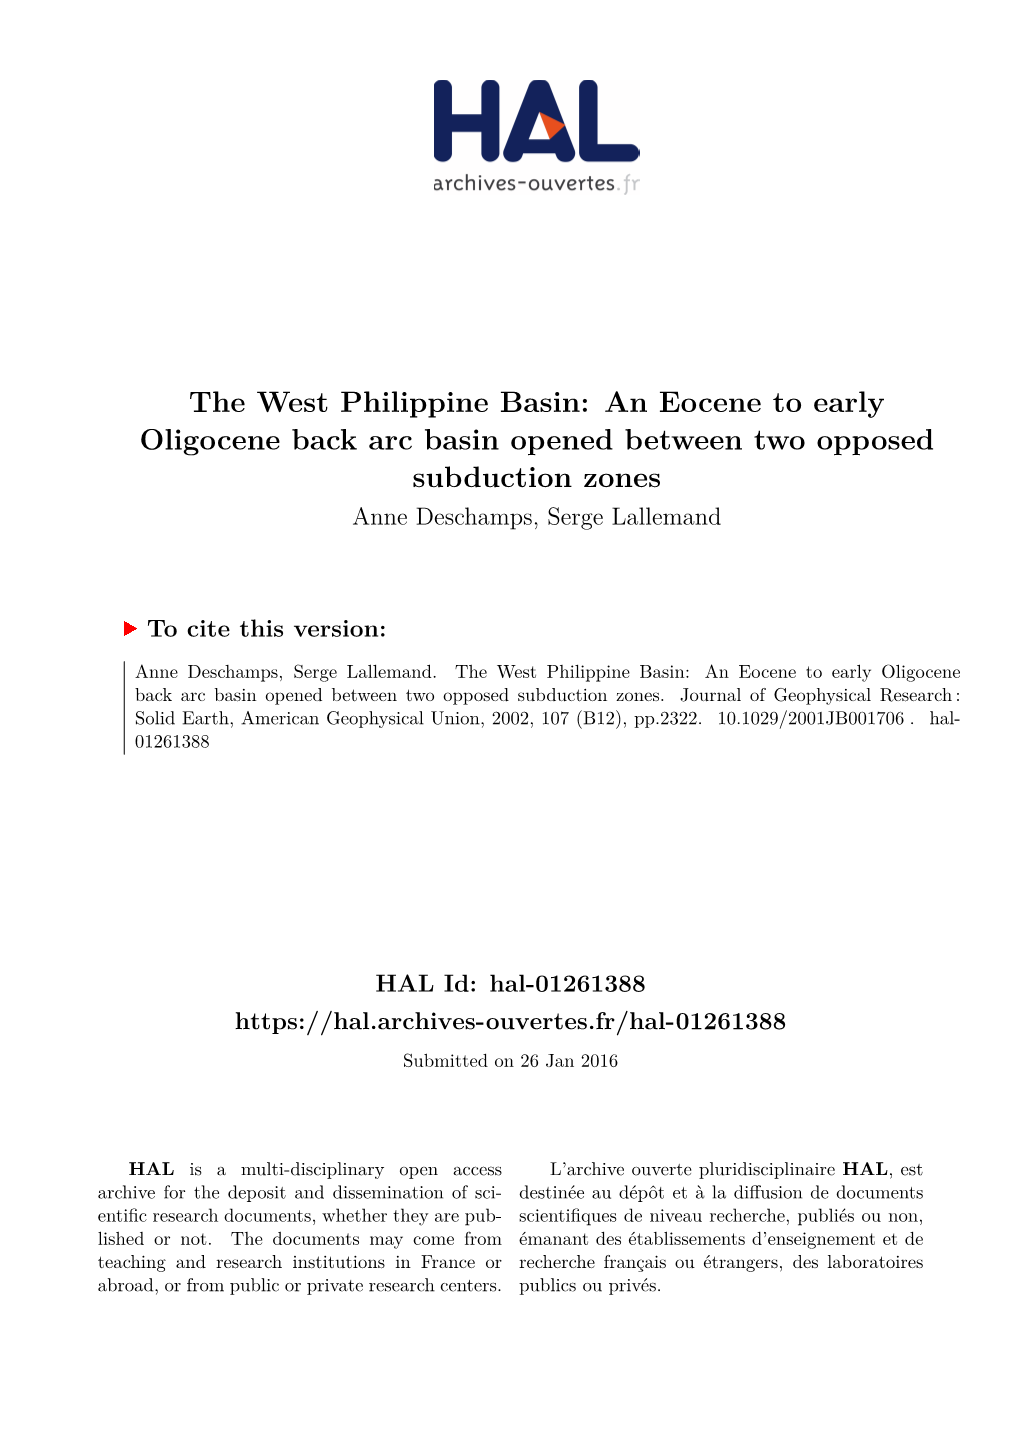 The West Philippine Basin: an Eocene to Early Oligocene Back Arc Basin Opened Between Two Opposed Subduction Zones Anne Deschamps, Serge Lallemand